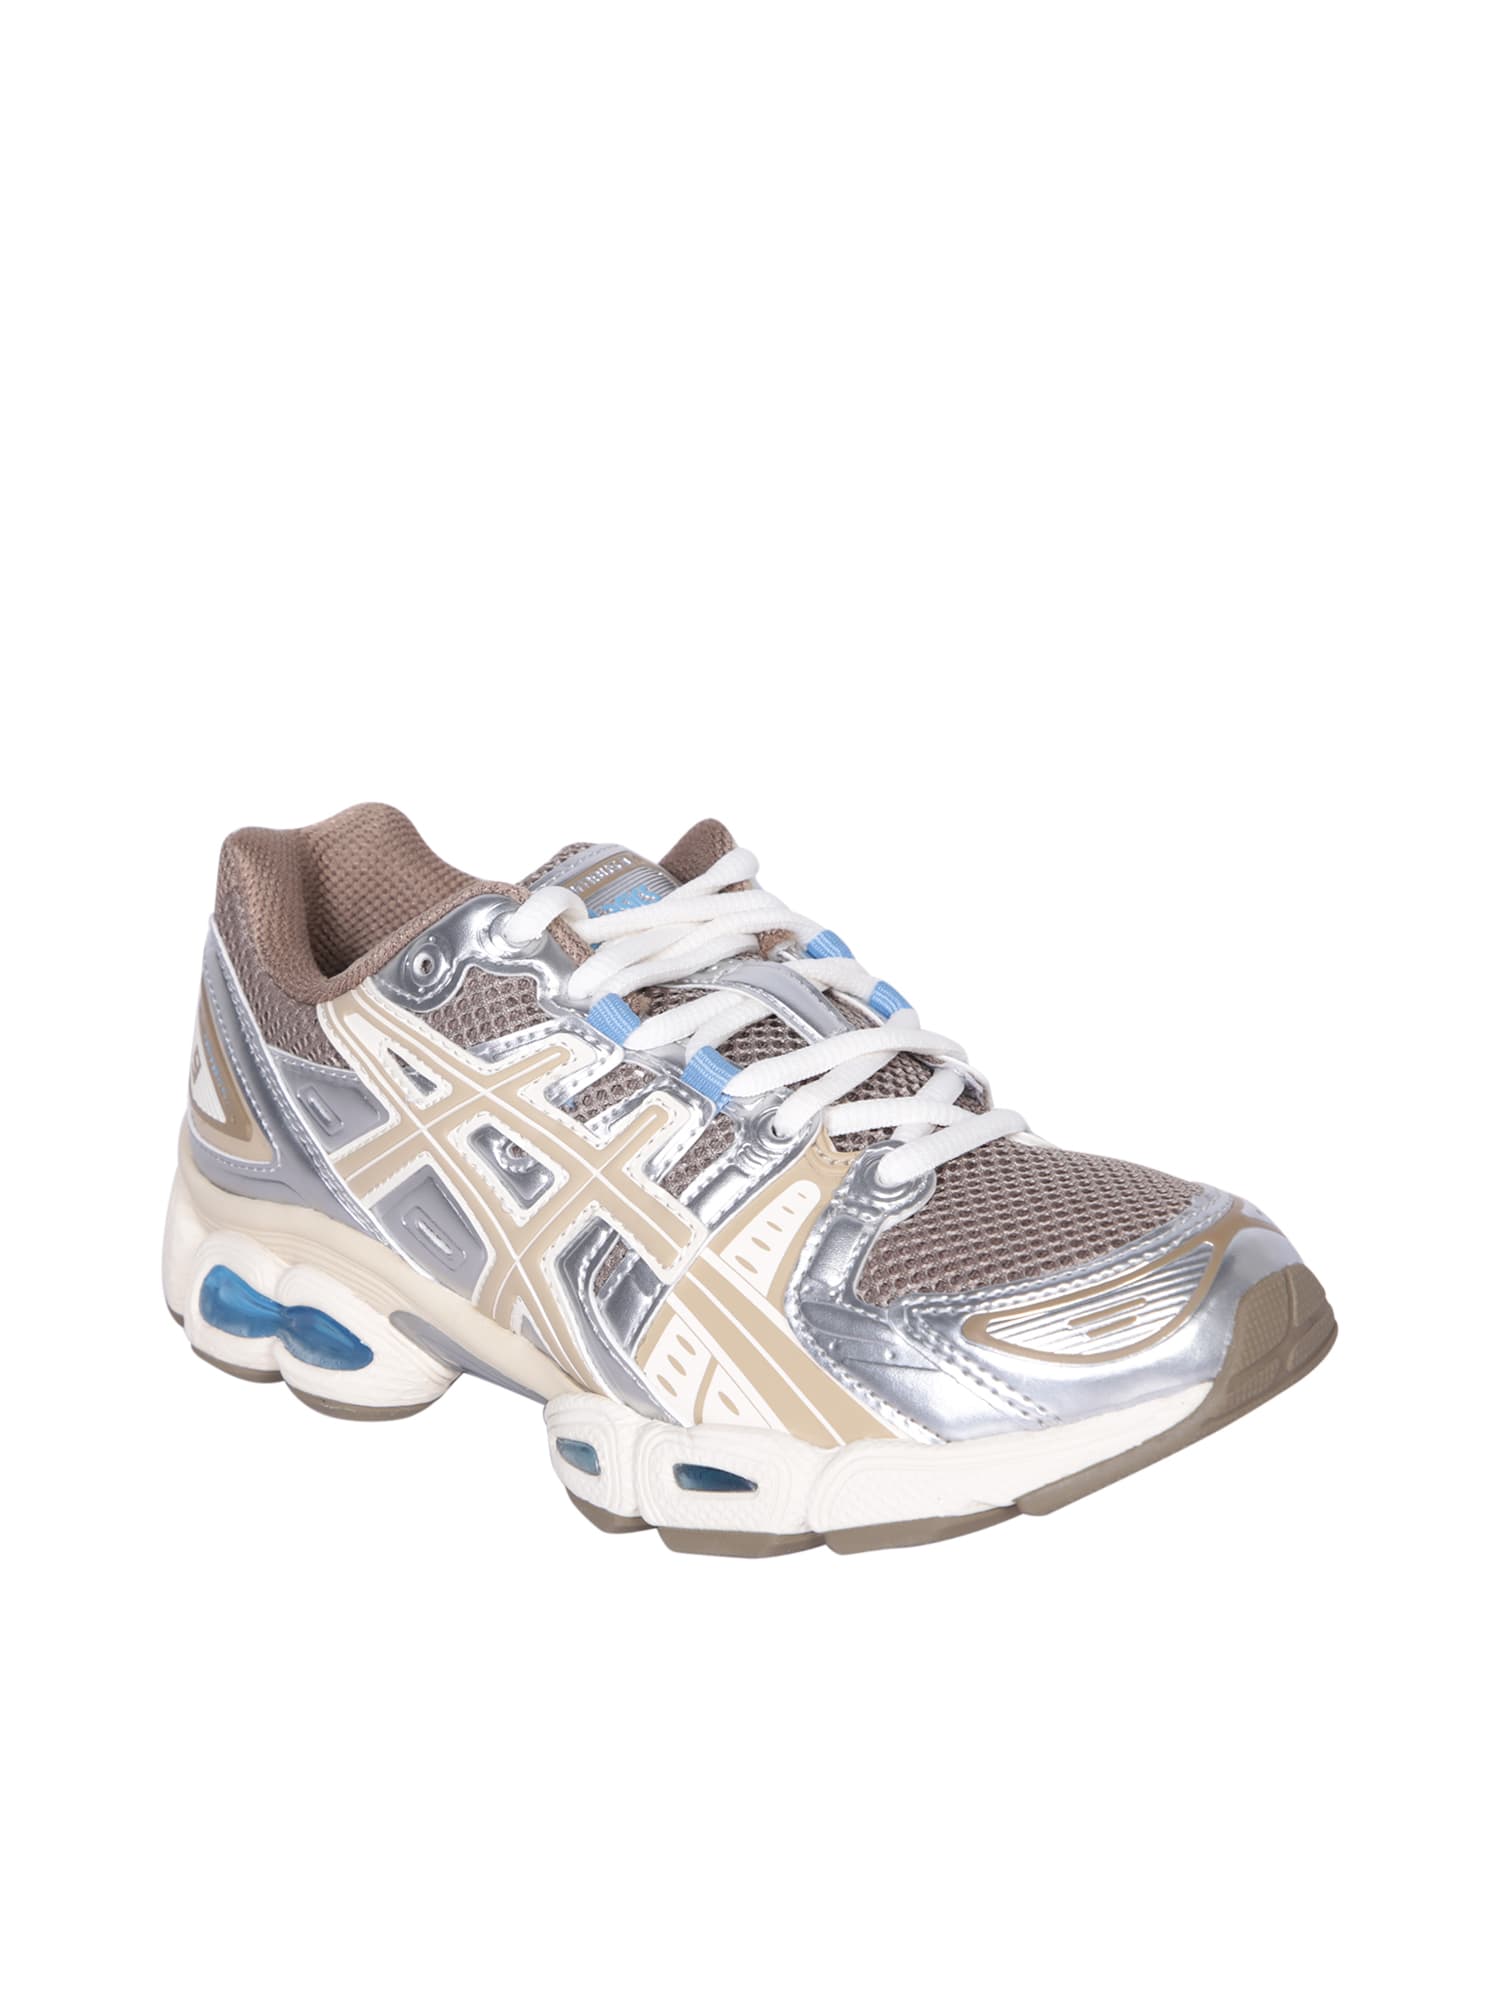 Shop Asics Nimbus 9 Sneakers In Beige And Light Blue